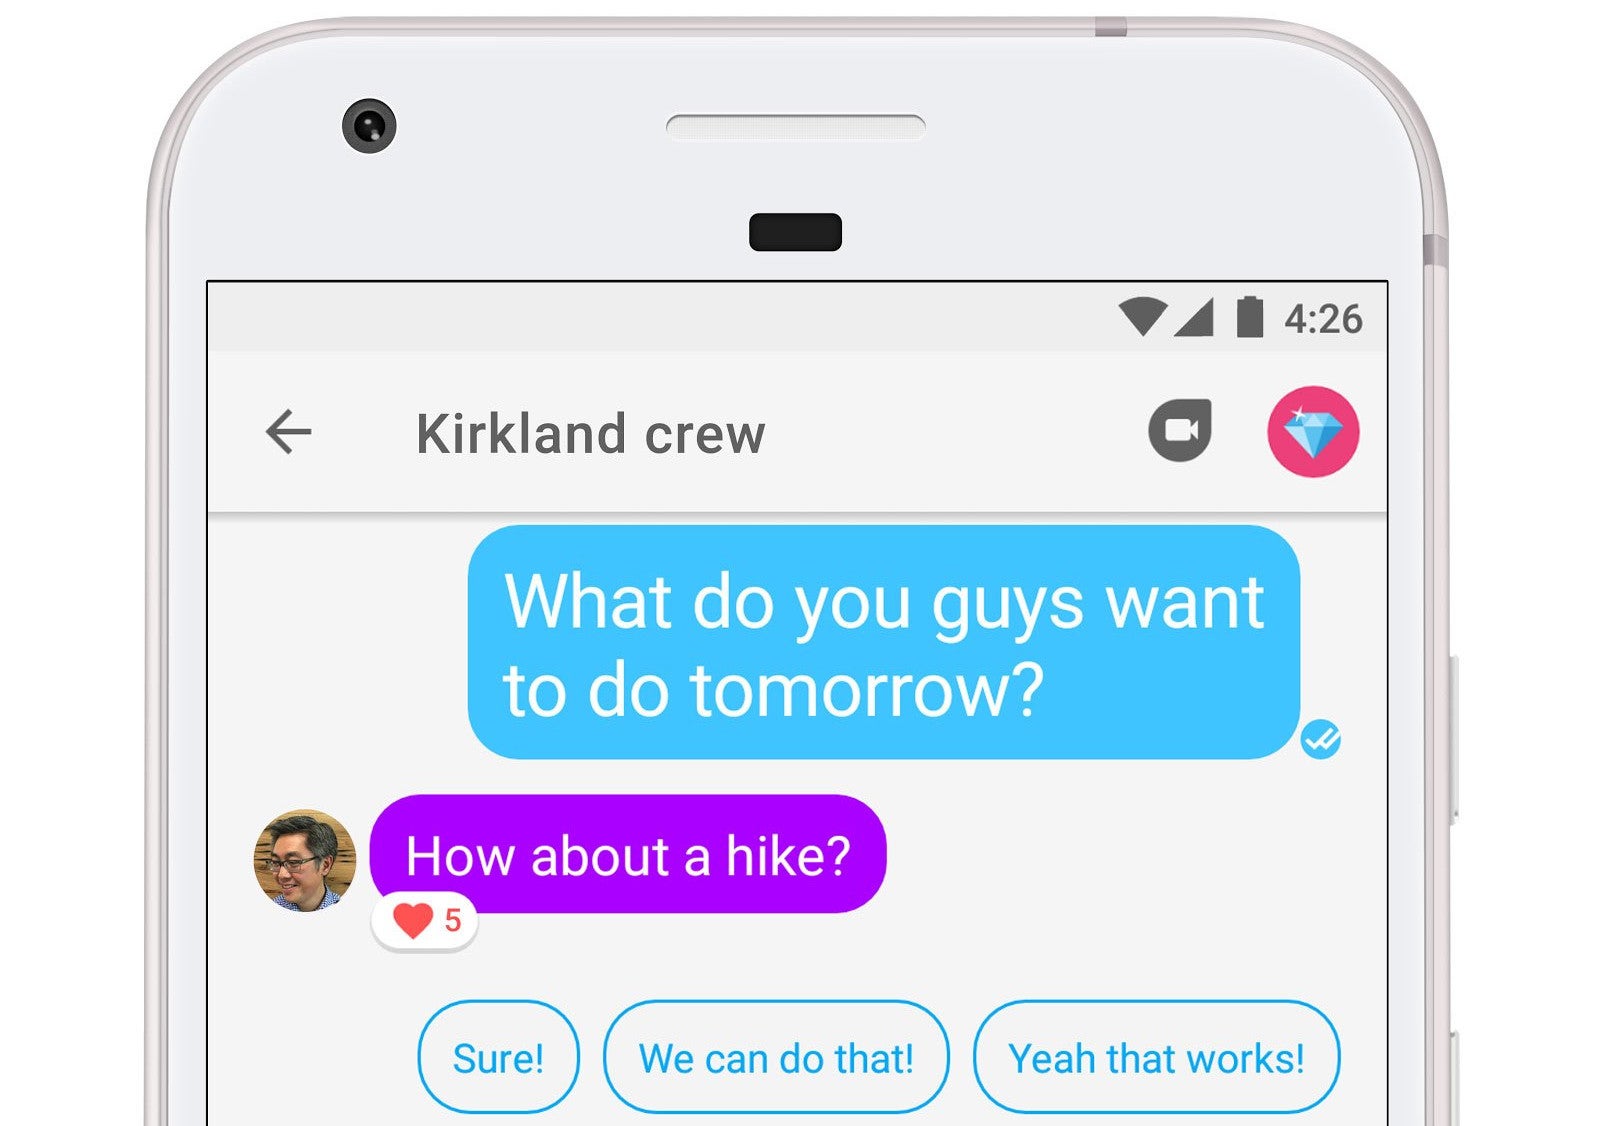 Google Allo update adds option to react to messages in chat